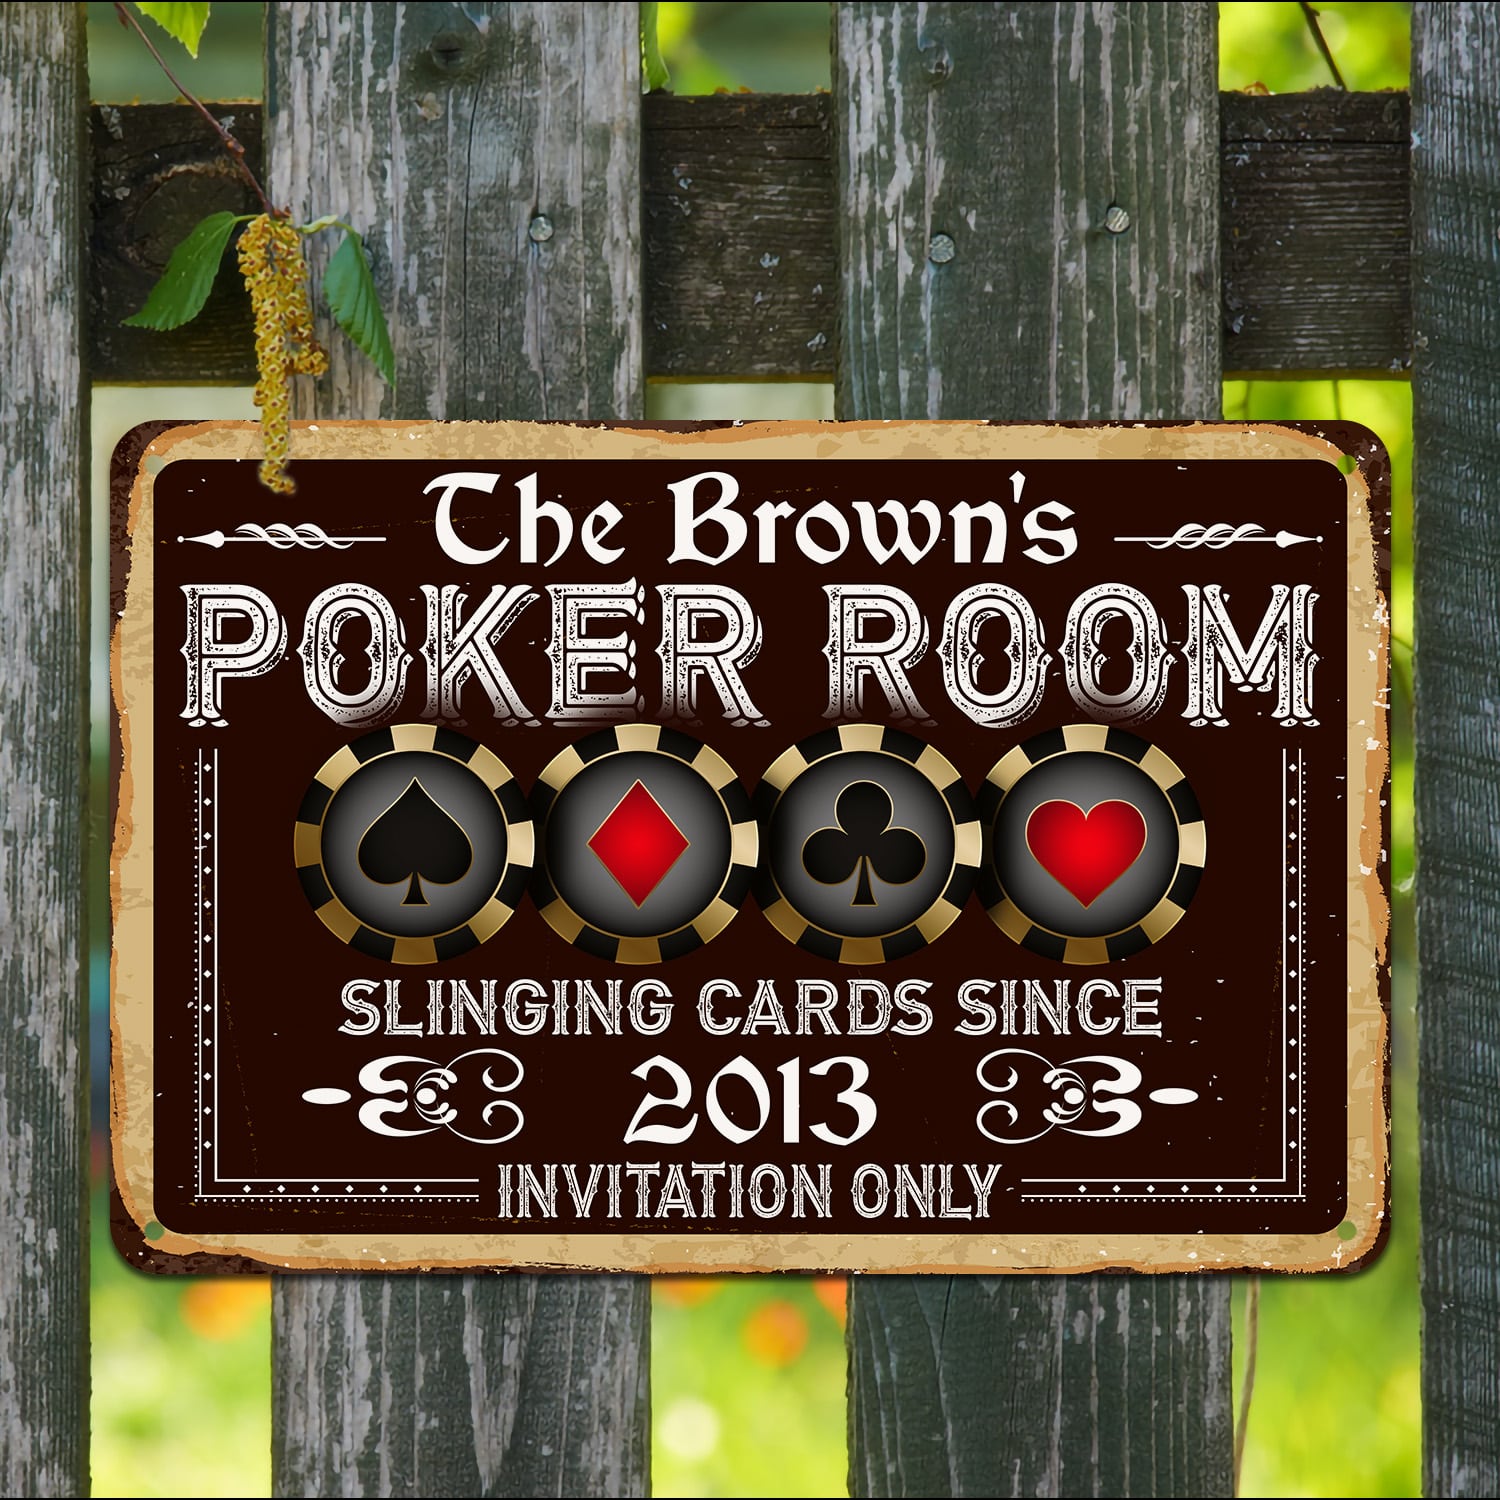 Personalized Family Name Poker Room Vintage Decorative Metal Sign – Indoor Outdoor Decor